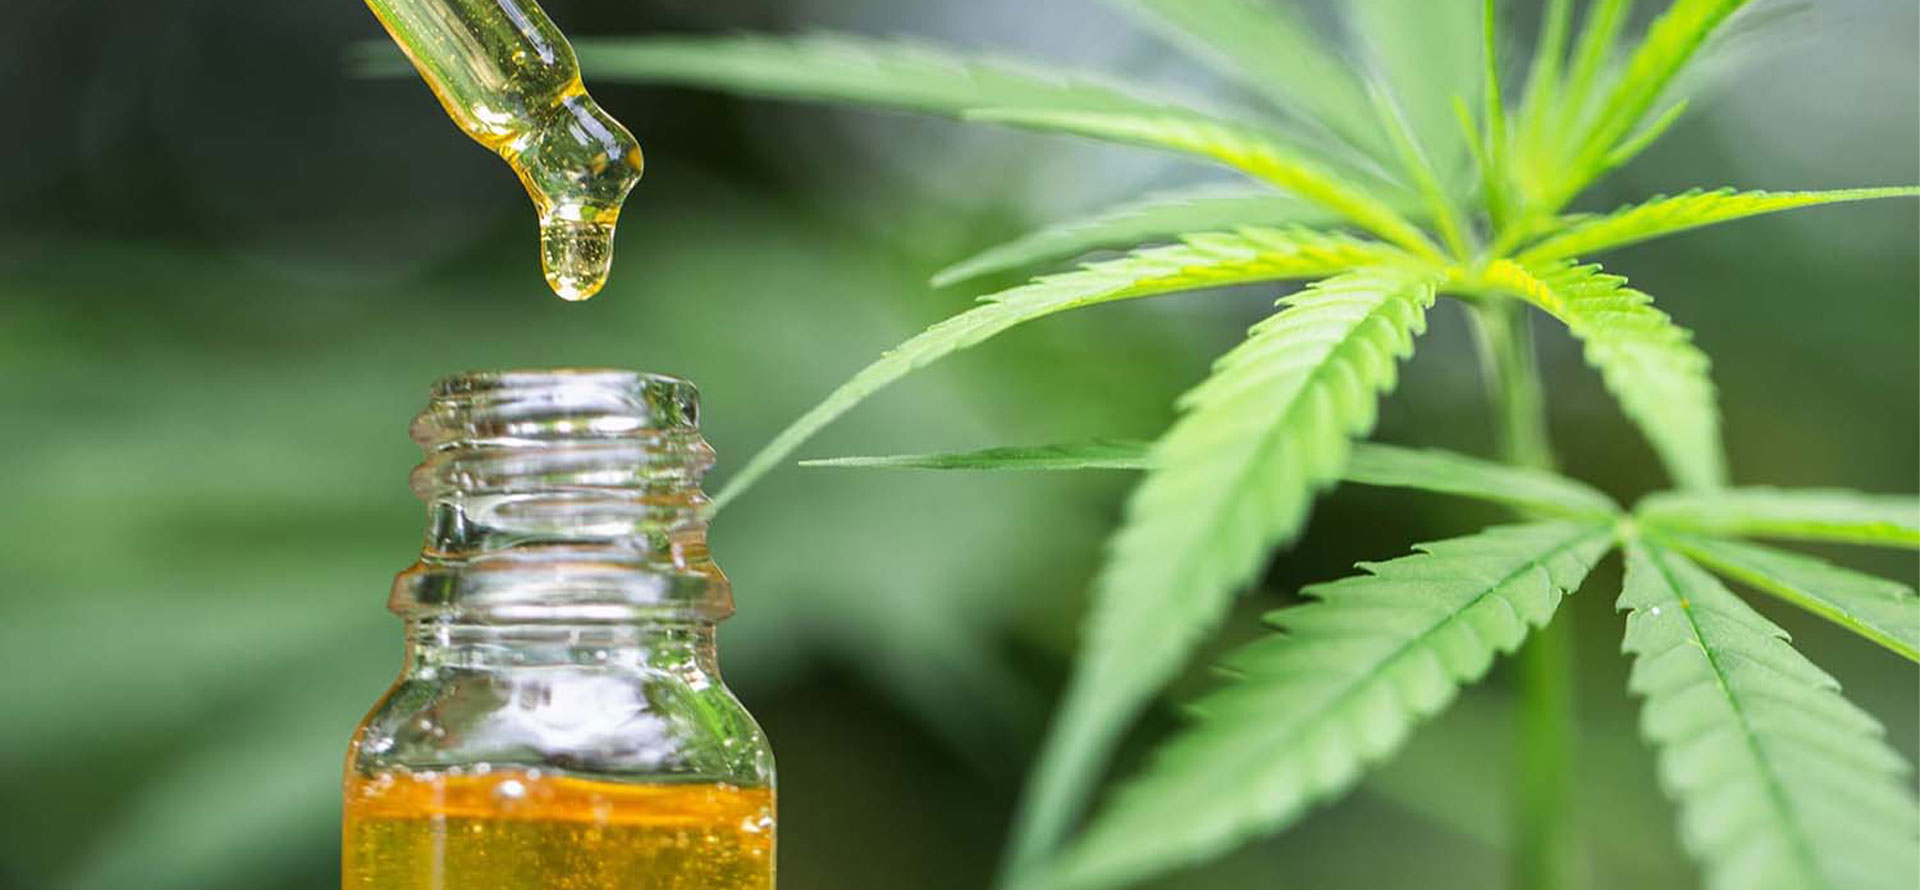 CBC CANNABINOID OIL - Cbd|Oil|Benefits|Cbc|Effects|Pain|Study|Health|Thc|Products|Cannabinoids|Studies|Research|Anxiety|Cannabis|Symptoms|Evidence|People|System|Disease|Treatment|Inflammation|Hemp|Body|Receptors|Disorders|Brain|Plant|Cells|Side|Effect|Blood|Patients|Cancer|Product|Skin|Marijuana|Properties|Cannabidiol|Cannabinoid|Cbd Oil|Cbd Products|Cbc Oil|Side Effects|Endocannabinoid System|Chronic Pain|Multiple Sclerosis|Pain Relief|Cannabis Plant|Cbd Oil Benefits|Blood Pressure|Health Benefits|High Blood Pressure|Anti-Inflammatory Properties|Neuropathic Pain|Animal Studies|Hemp Plant|Hemp Oil|Anxiety Disorders|Cbd Product|Immune System|Clinical Trials|Cbd Gummies|Nerve Cells|Nervous System|Entourage Effect|Hemp Seed Oil|United States|Cbd Oils|Drug Administration